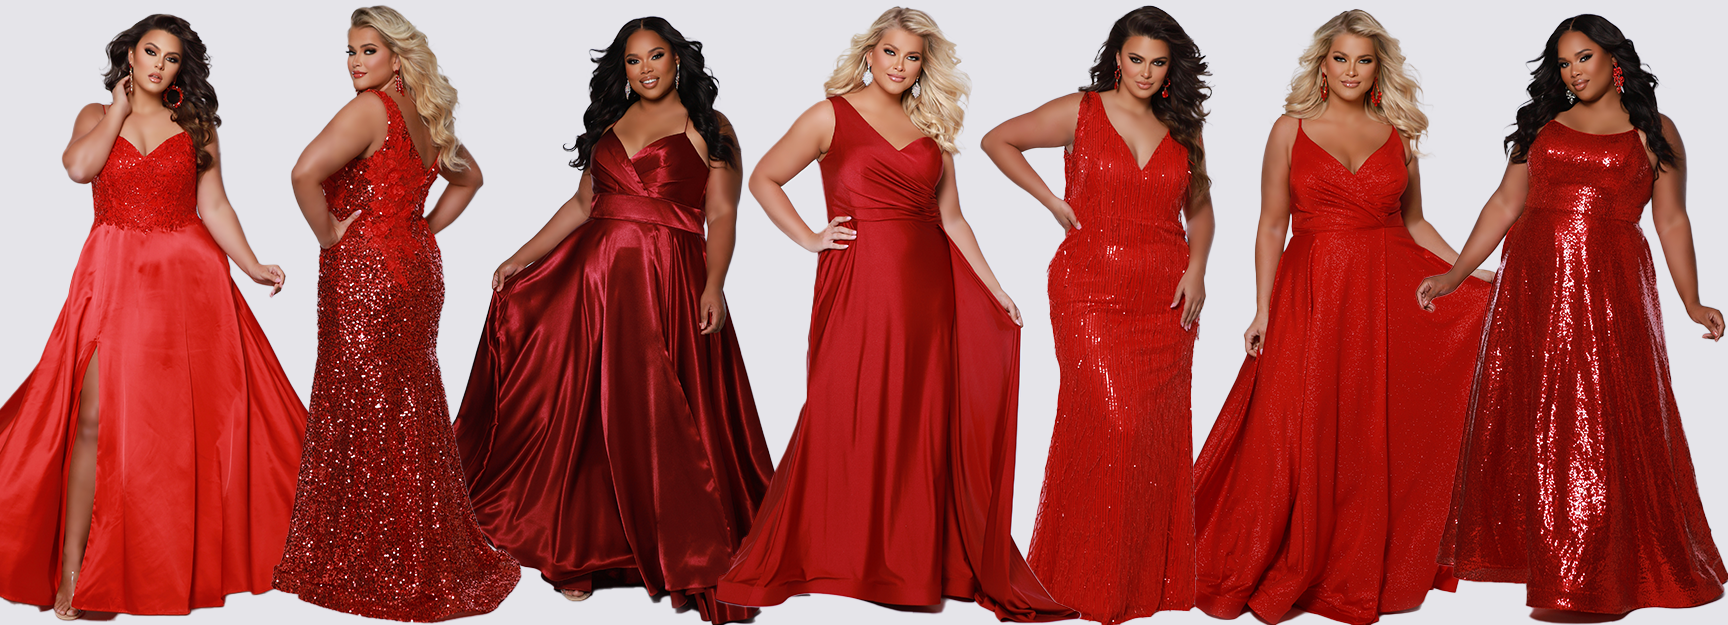 Sydney's Closet Plus Size Collection of Red Prom and Evening Dresses